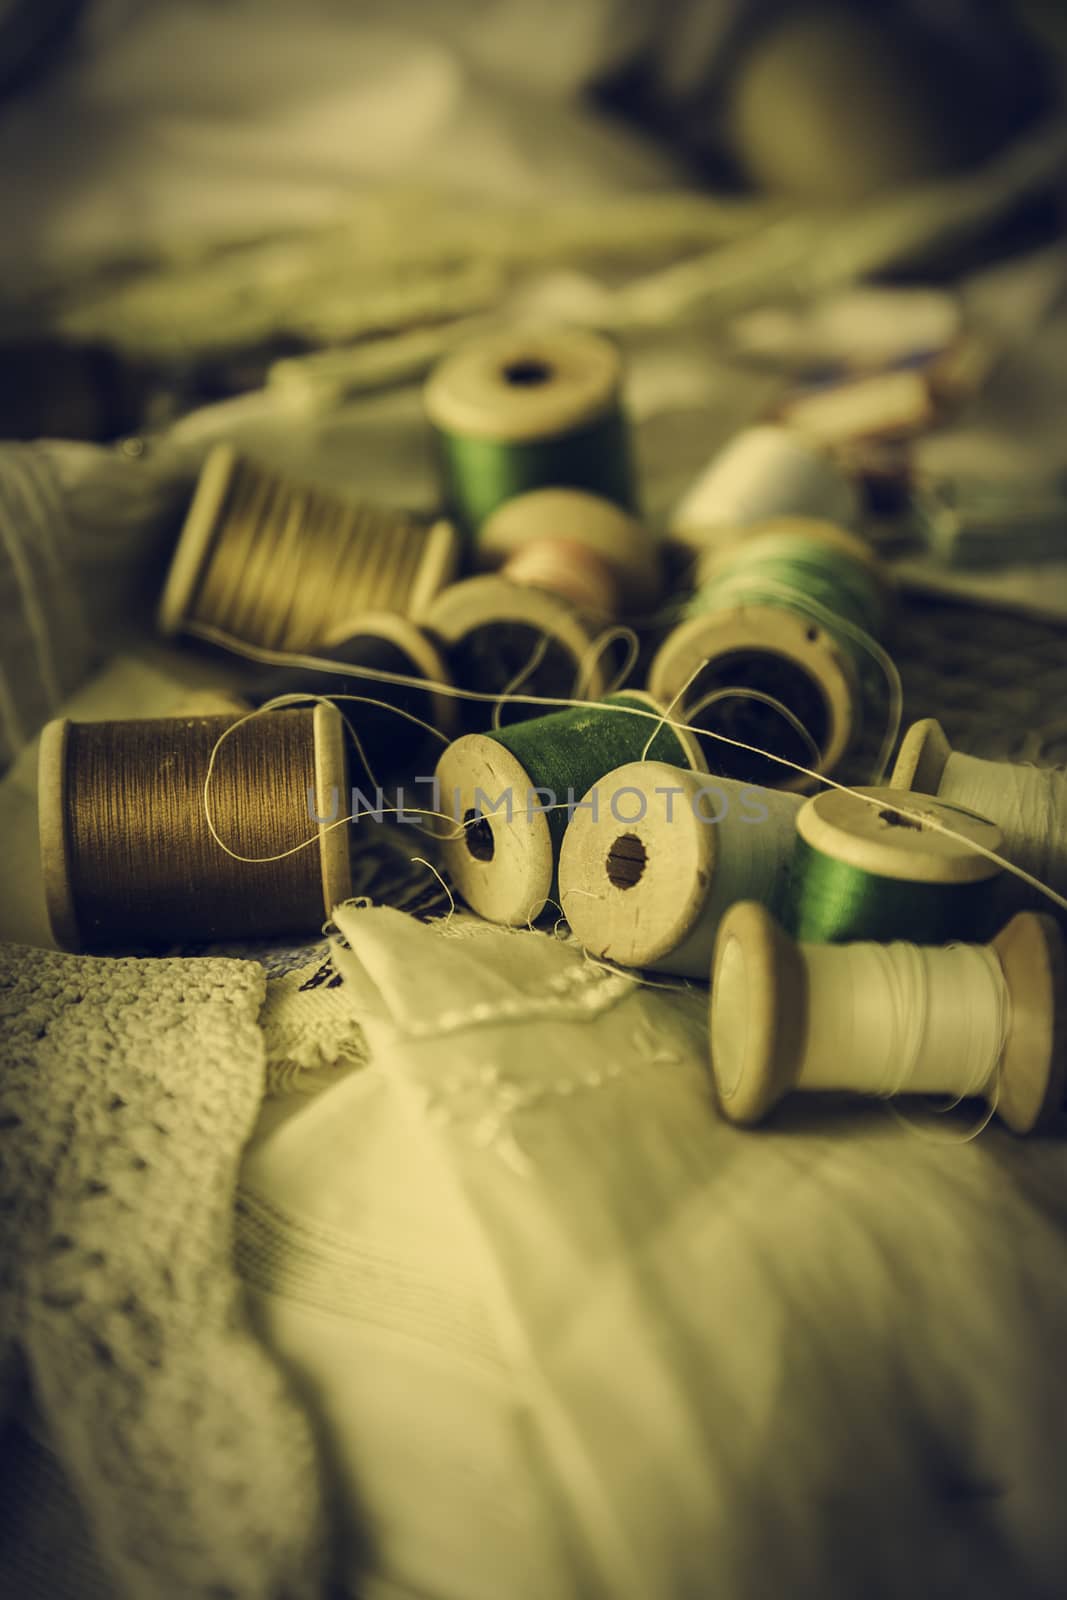 Old sewing threads, objects for sewing clothes